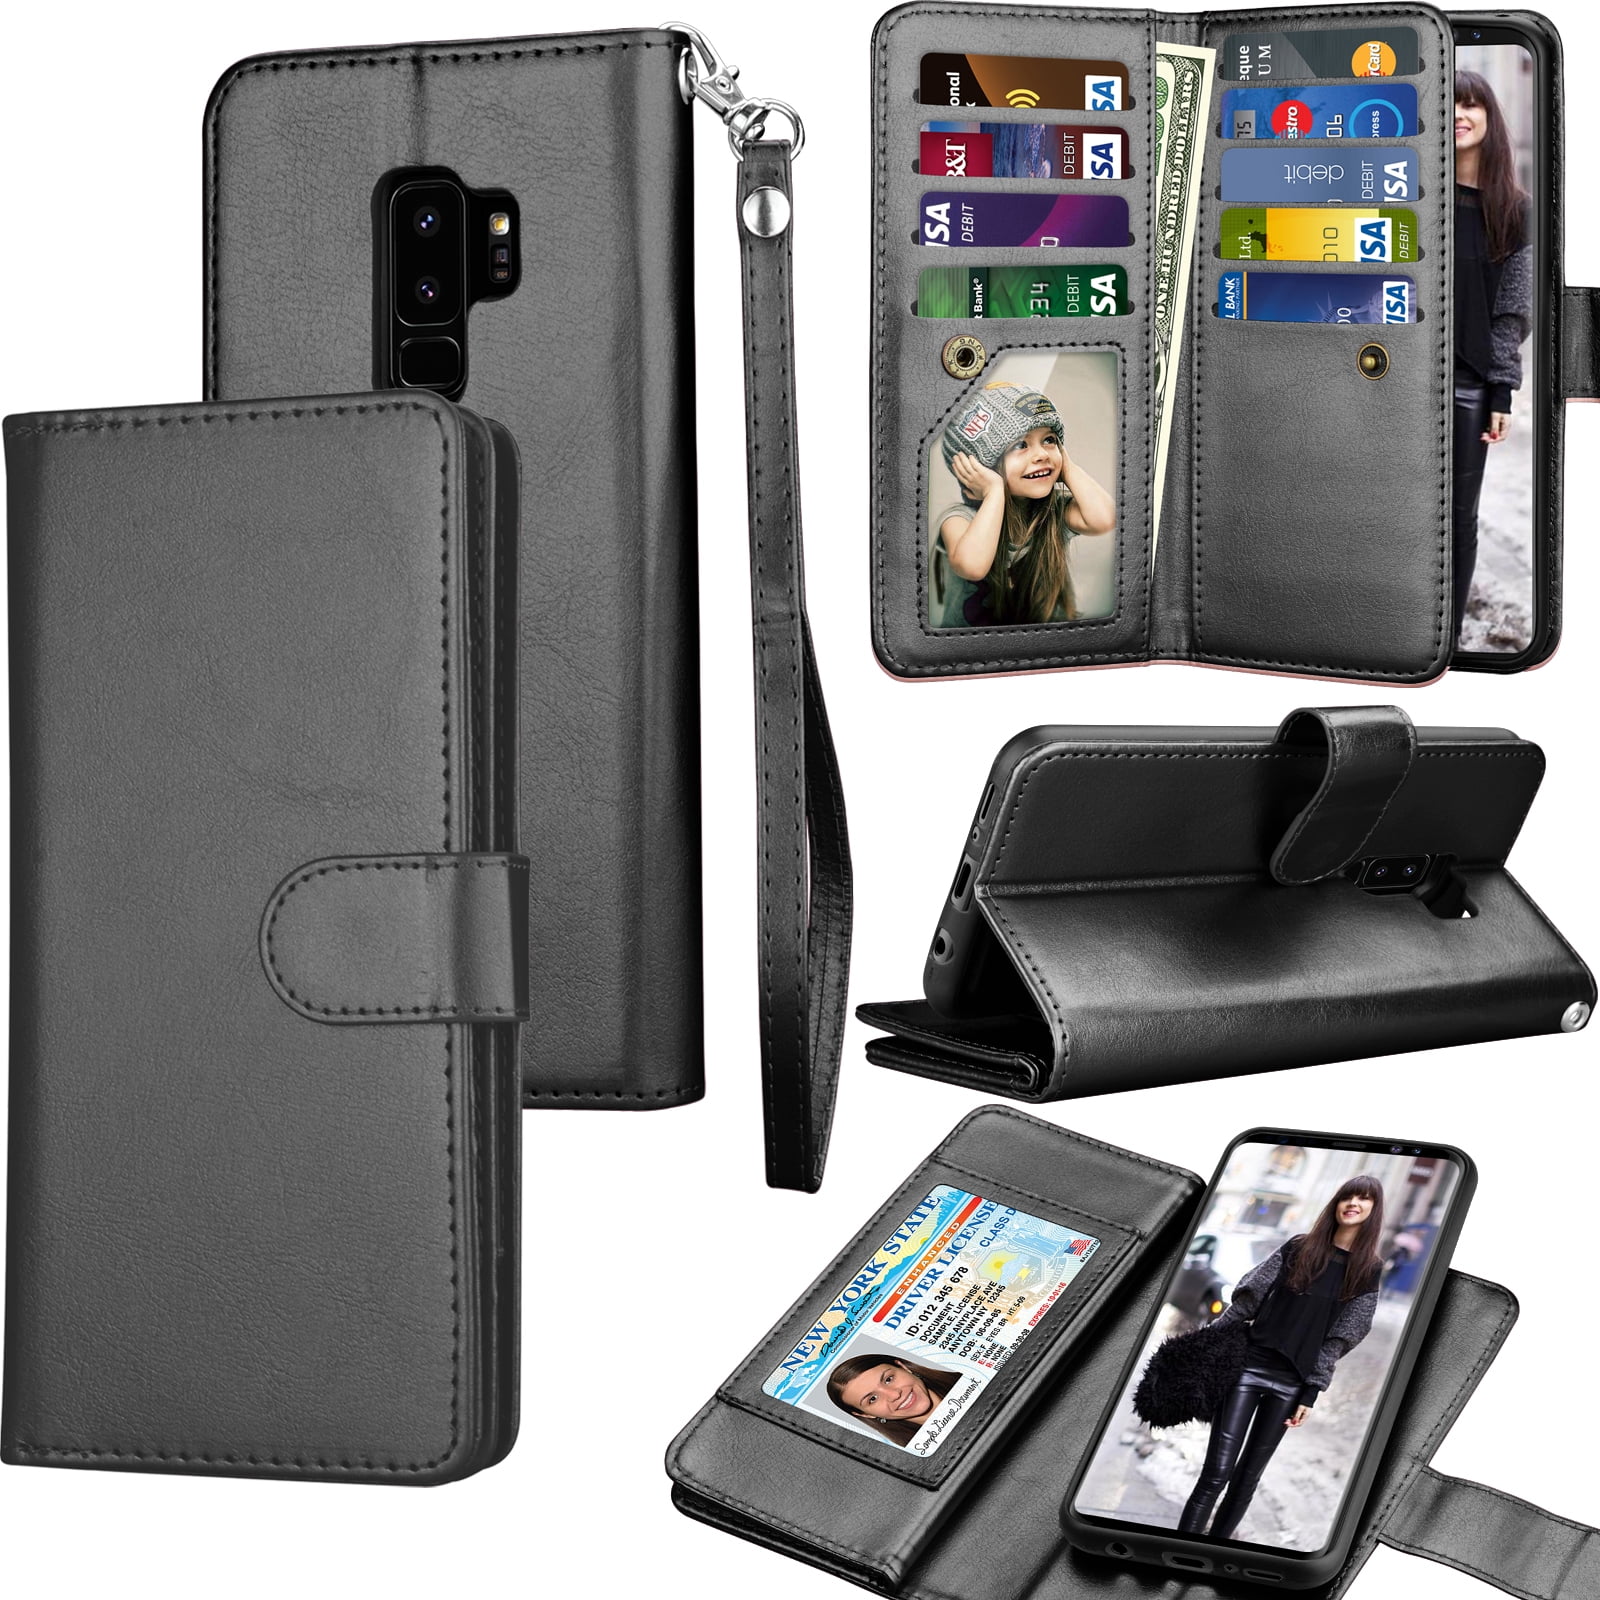 Samsung Galaxy S9 Plus Flip Case Cover for Leather Extra-Protective Business Kickstand Wallet Cover Card Holders Flip Cover